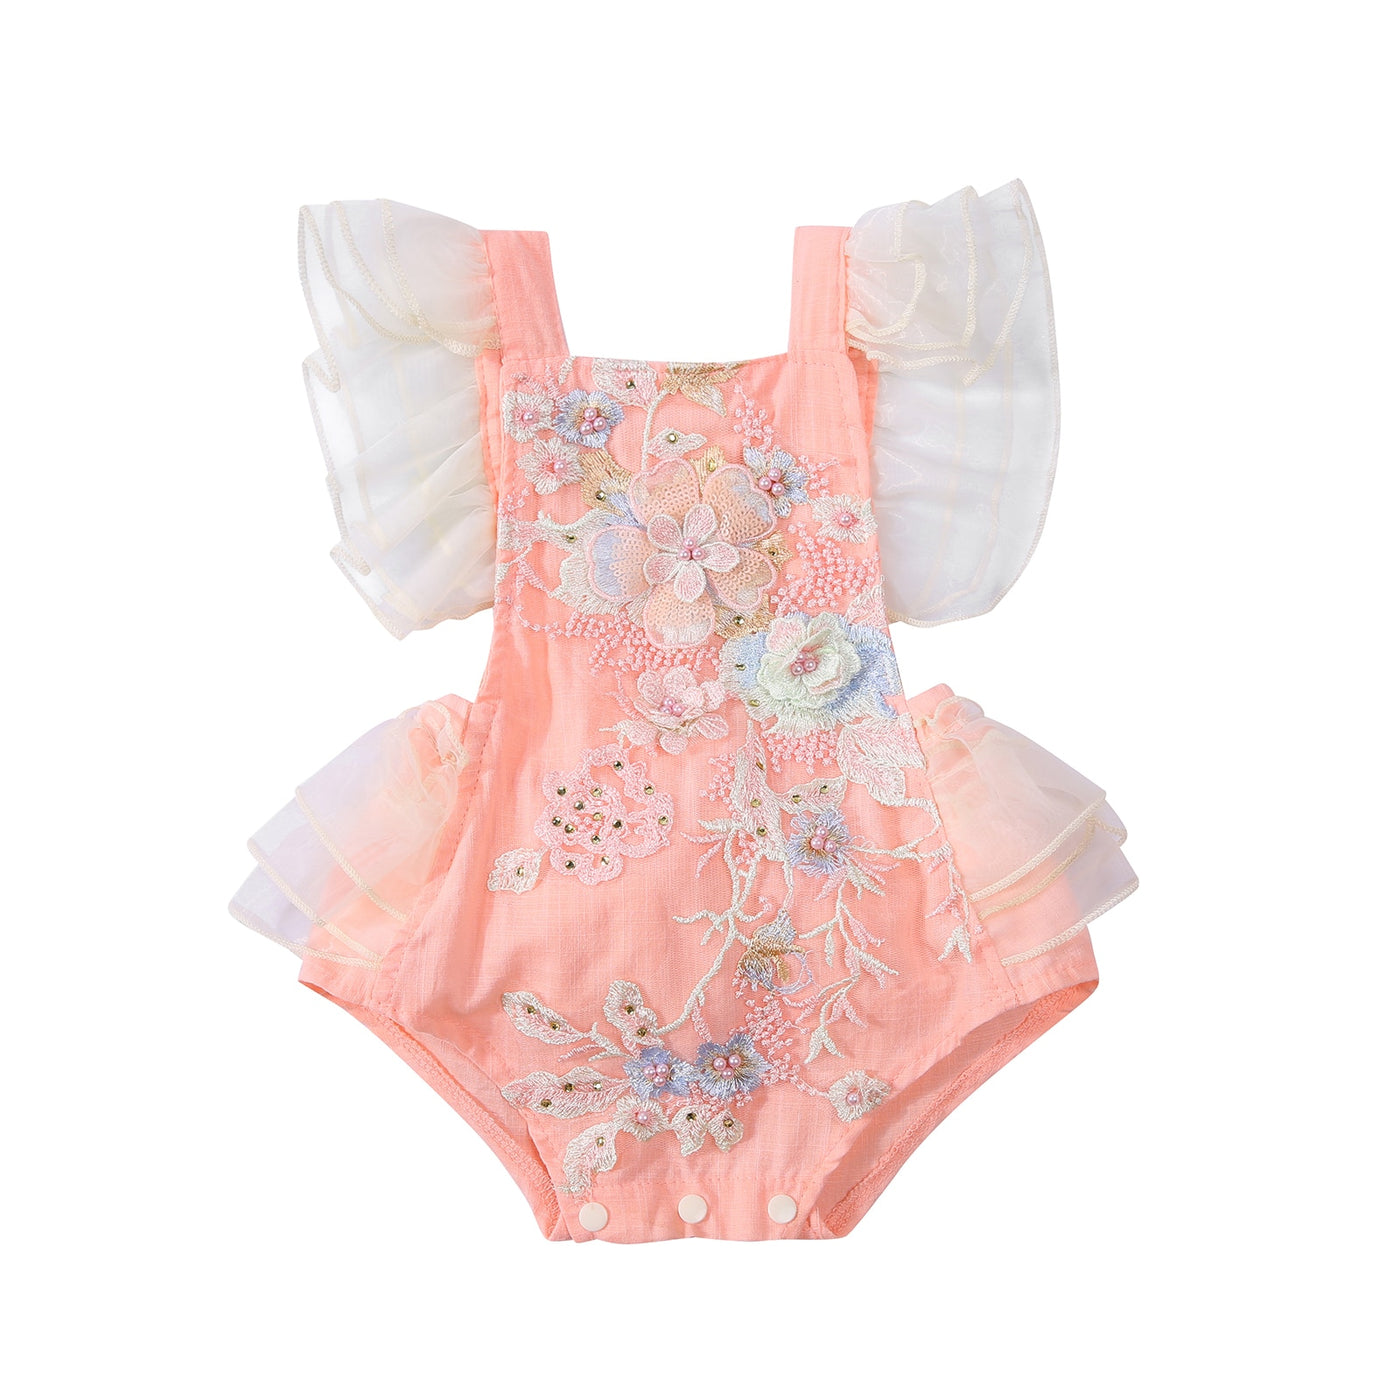 Sweet Embroidered 6-24M Romper Dress - Coco Potato - dresses and partywear for little girls